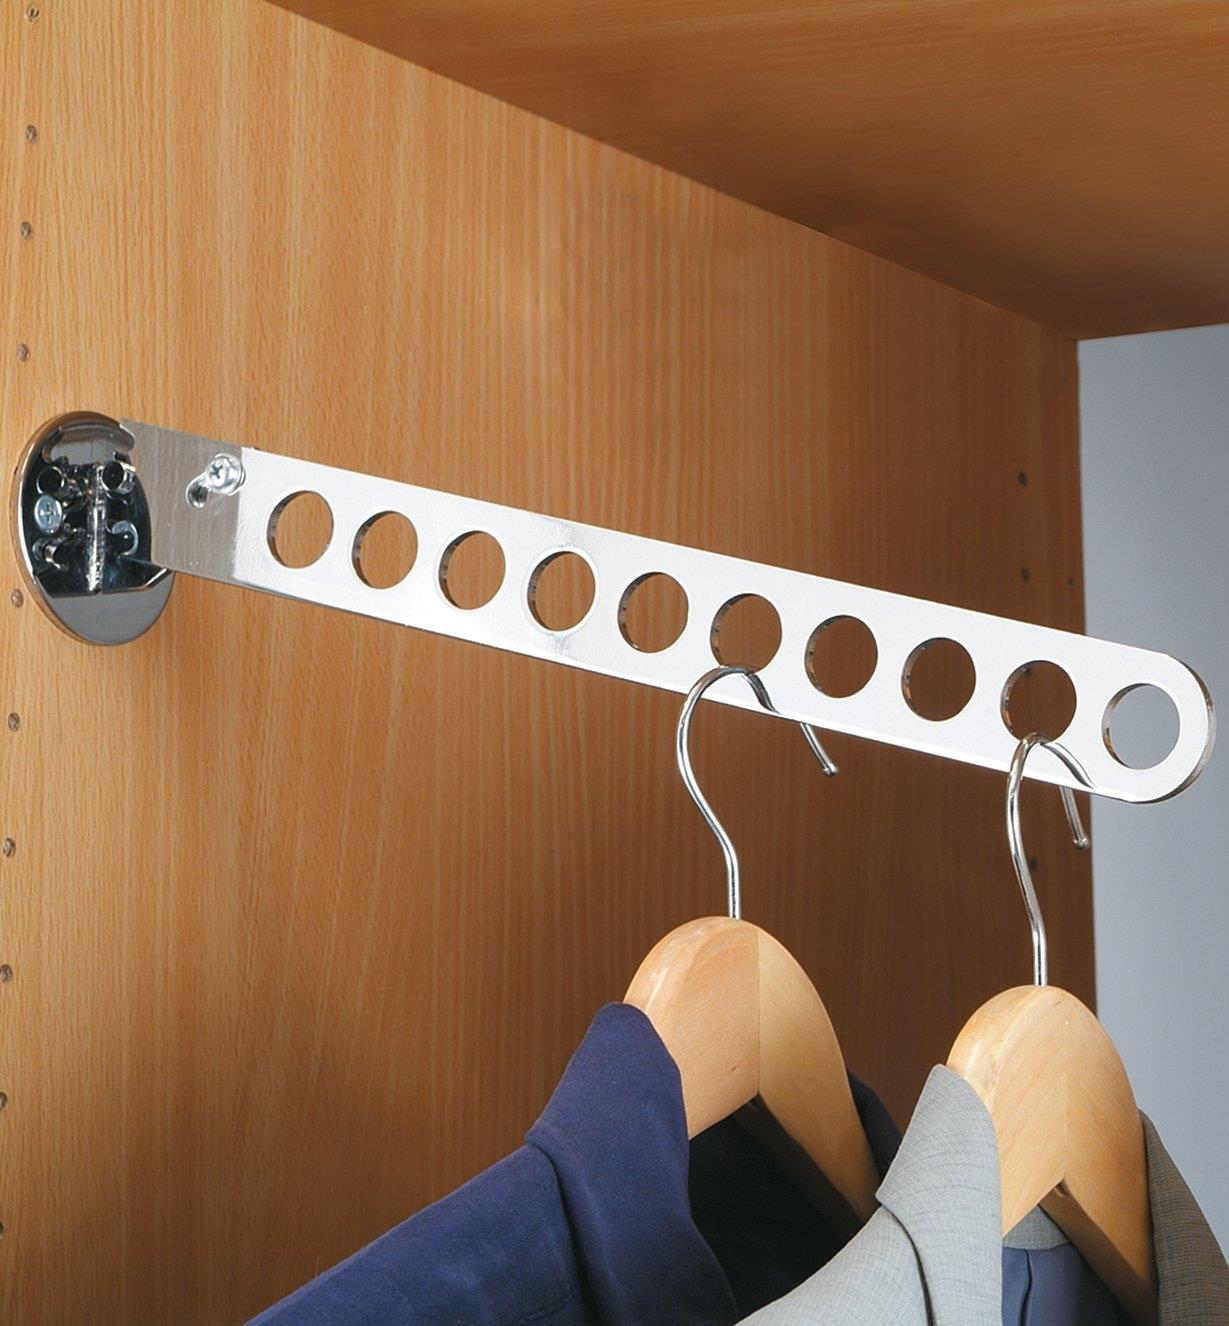 Folding Hanger Rack installed in a closet, holding two shirts on hangers